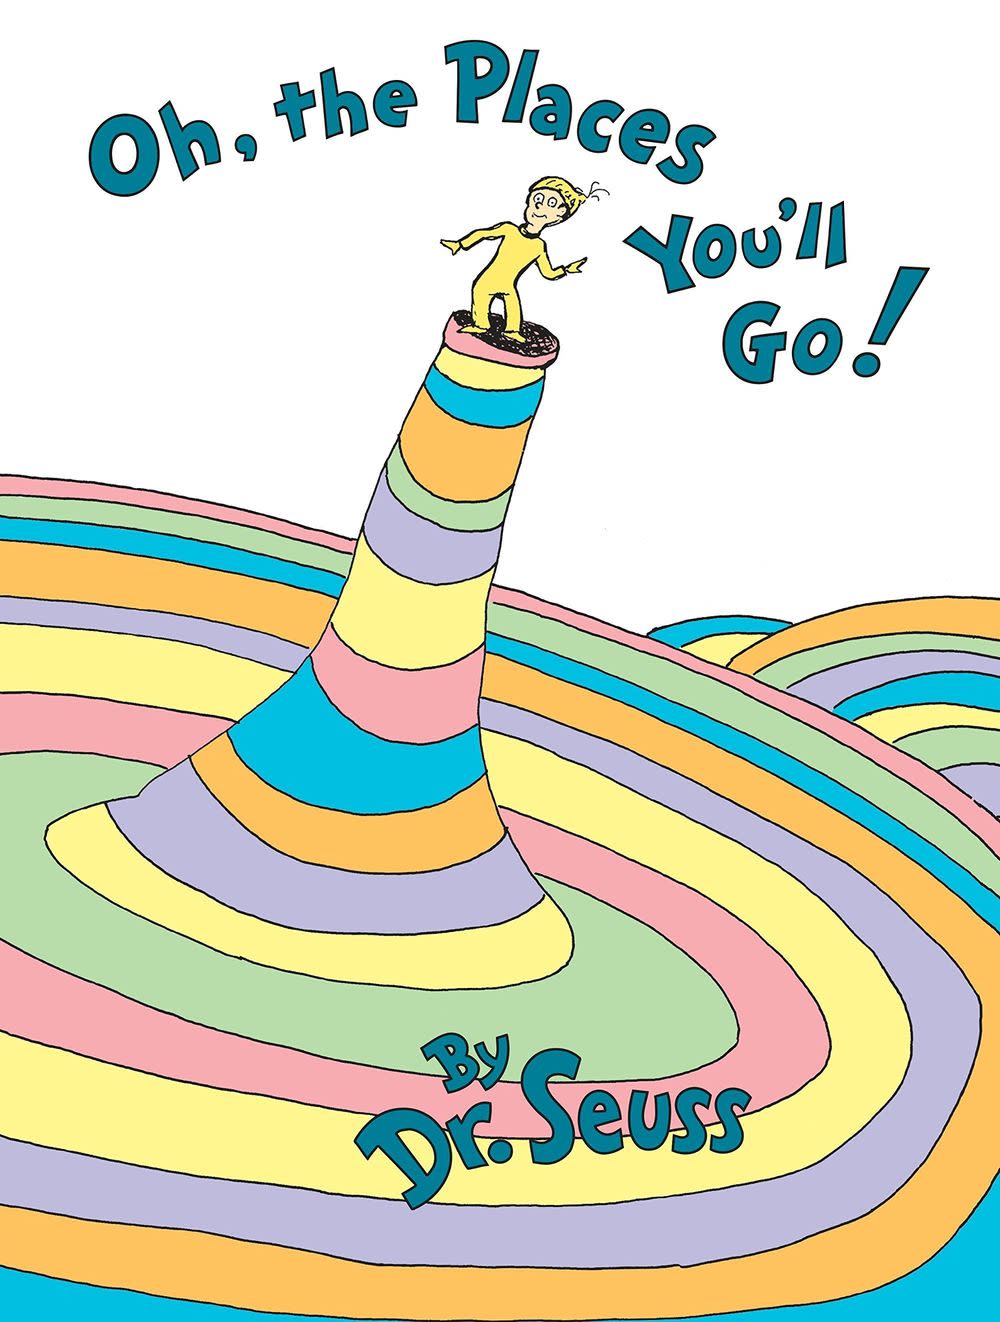 Oh the Places Youll Go by Dr. Seuss